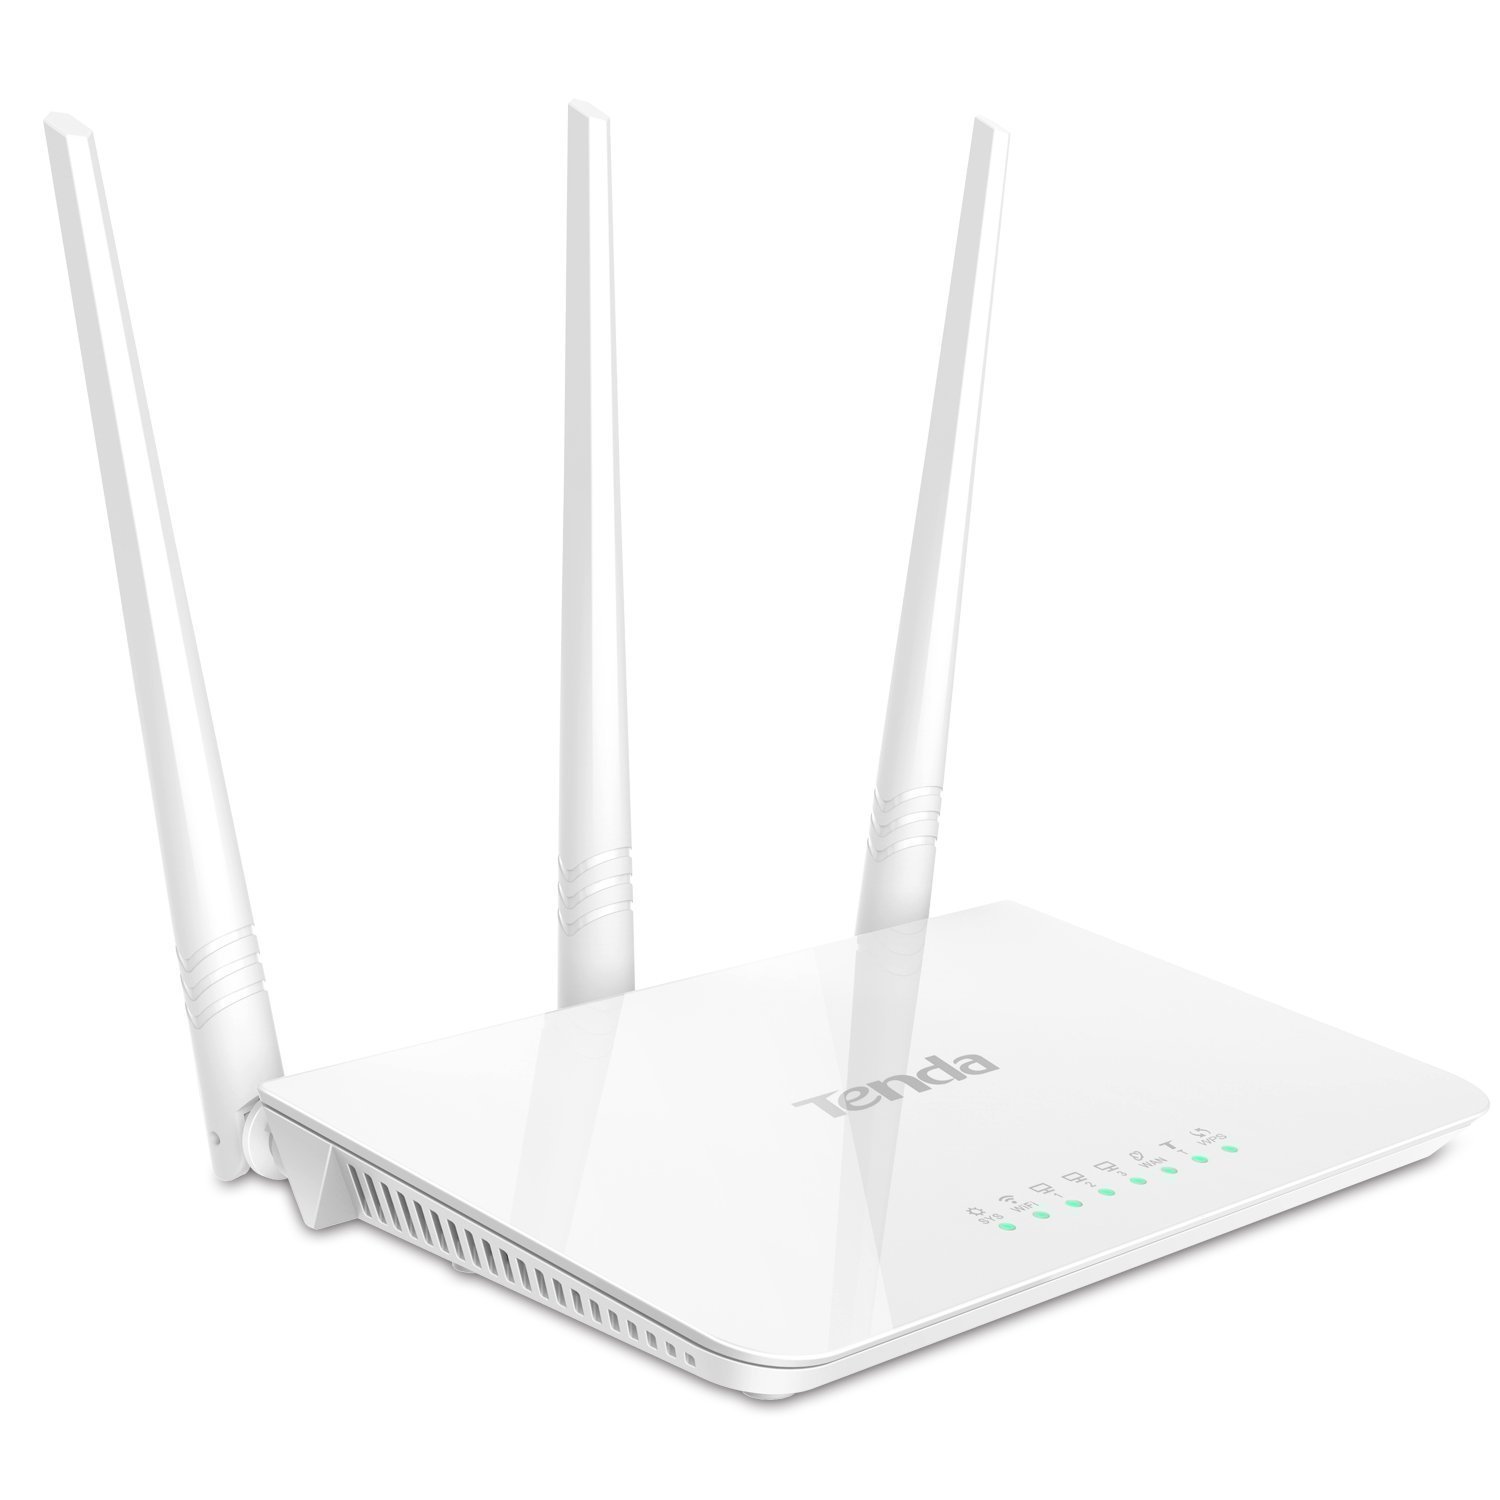 Tenda F3 Wi-Fi Router, WAN, 300mbps – Rs.830 – LT Online Store Mumbai –  LIVE (1.3k Videos) ©2005 Trusted